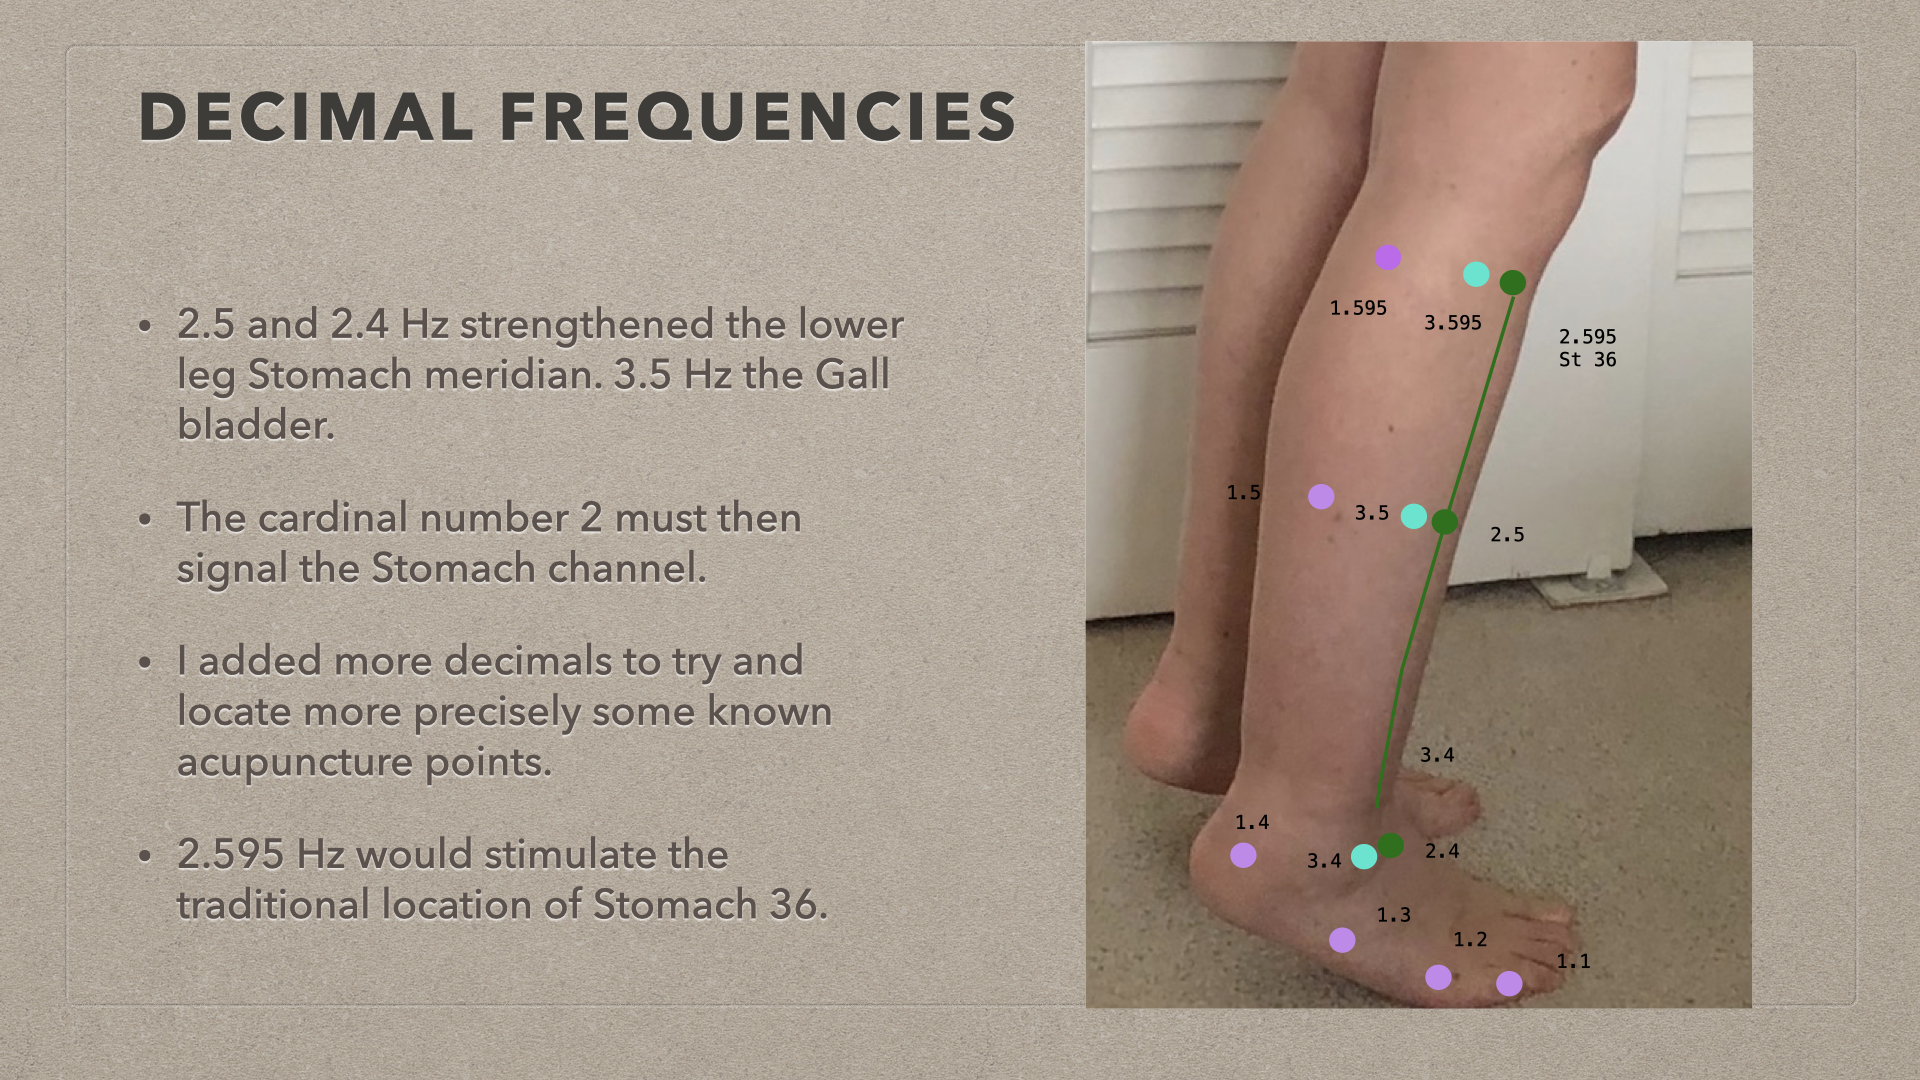 the discovery of digital acupuncture